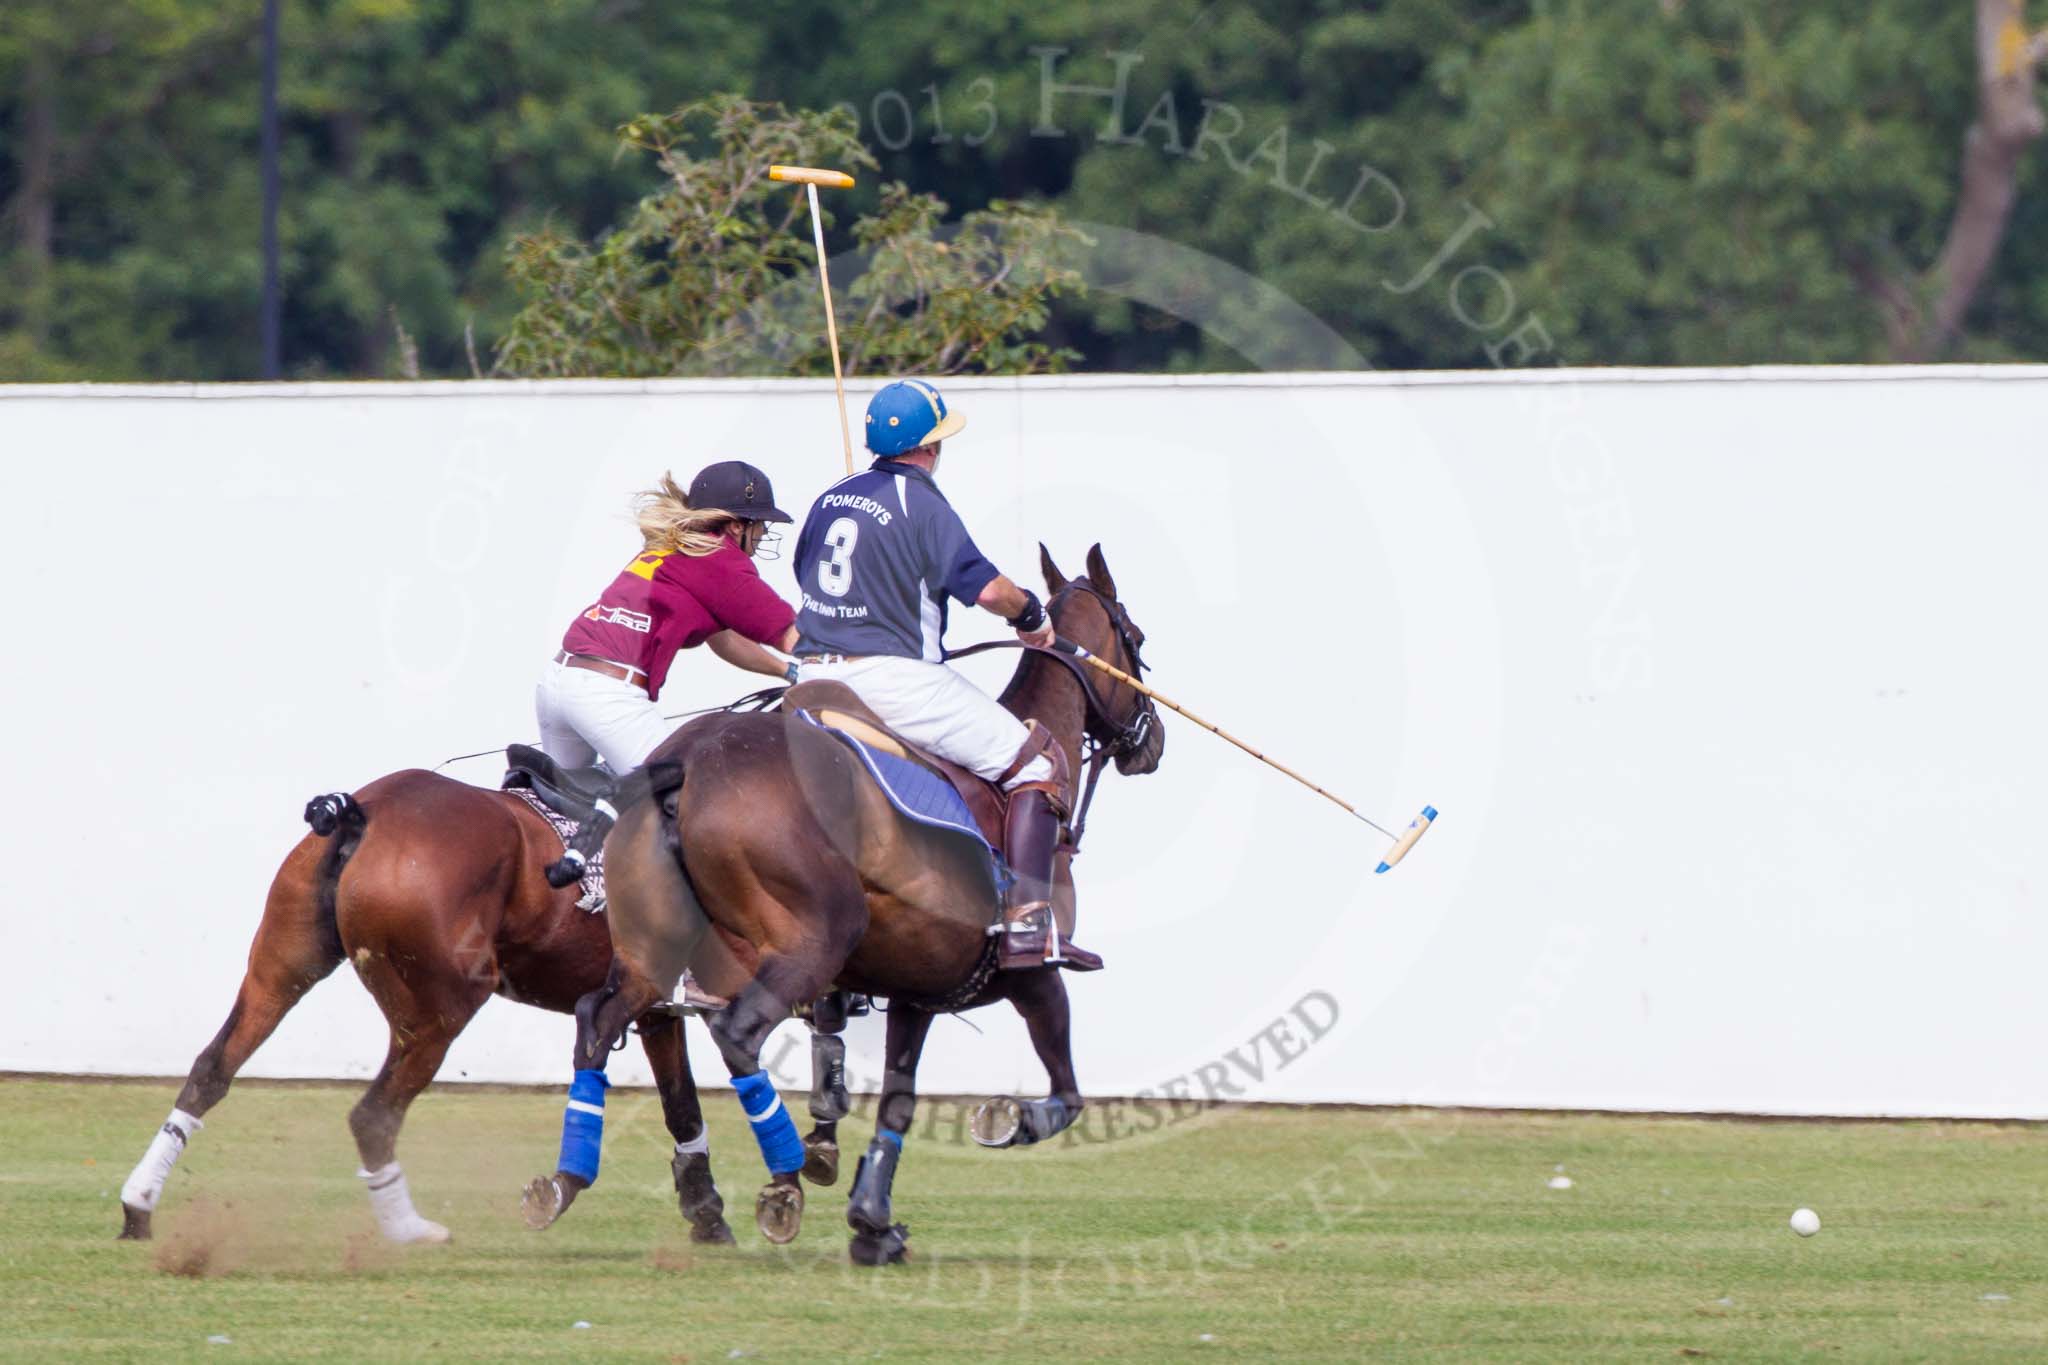 DBPC Polo in the Park 2013, Final of the Amaranther Trophy (0 Goal), Bucking Broncos vs The Inn Team.
Dallas Burston Polo Club, ,
Southam,
Warwickshire,
United Kingdom,
on 01 September 2013 at 12:12, image #171